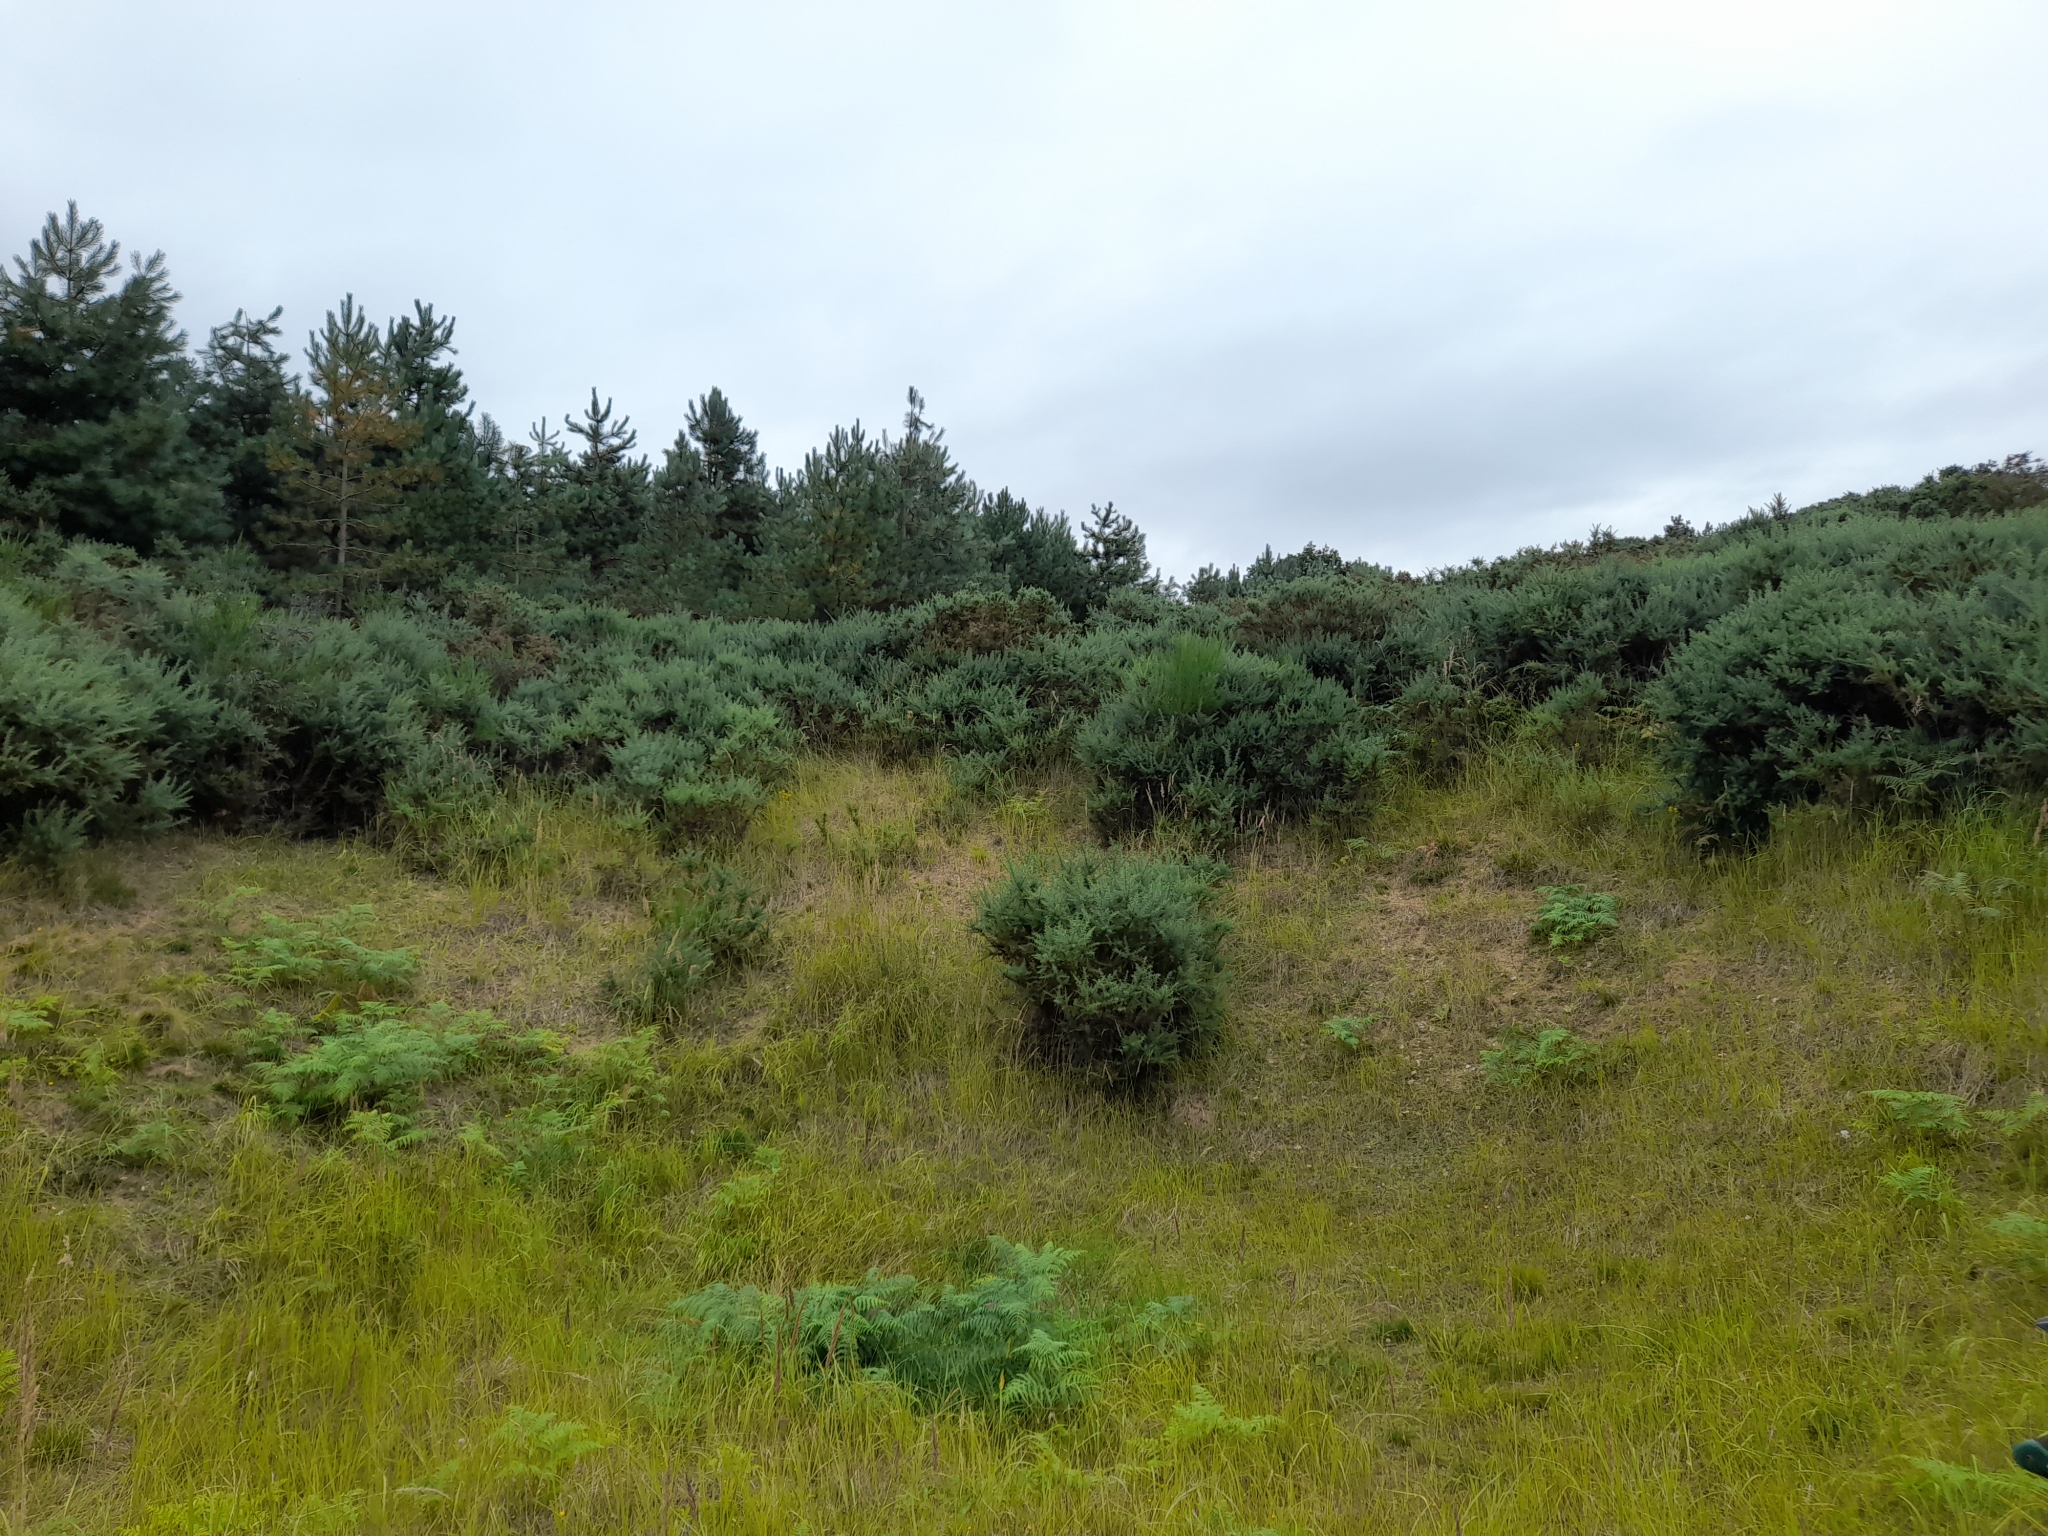 A photo from the FoTF Conservation Event - August 2021 - Maintenance tasks at Mildenhall Mugwort Pit & Mildenhall Warren Lodge : A shot of one of the slopes of Mildenhall Mugwort Pit